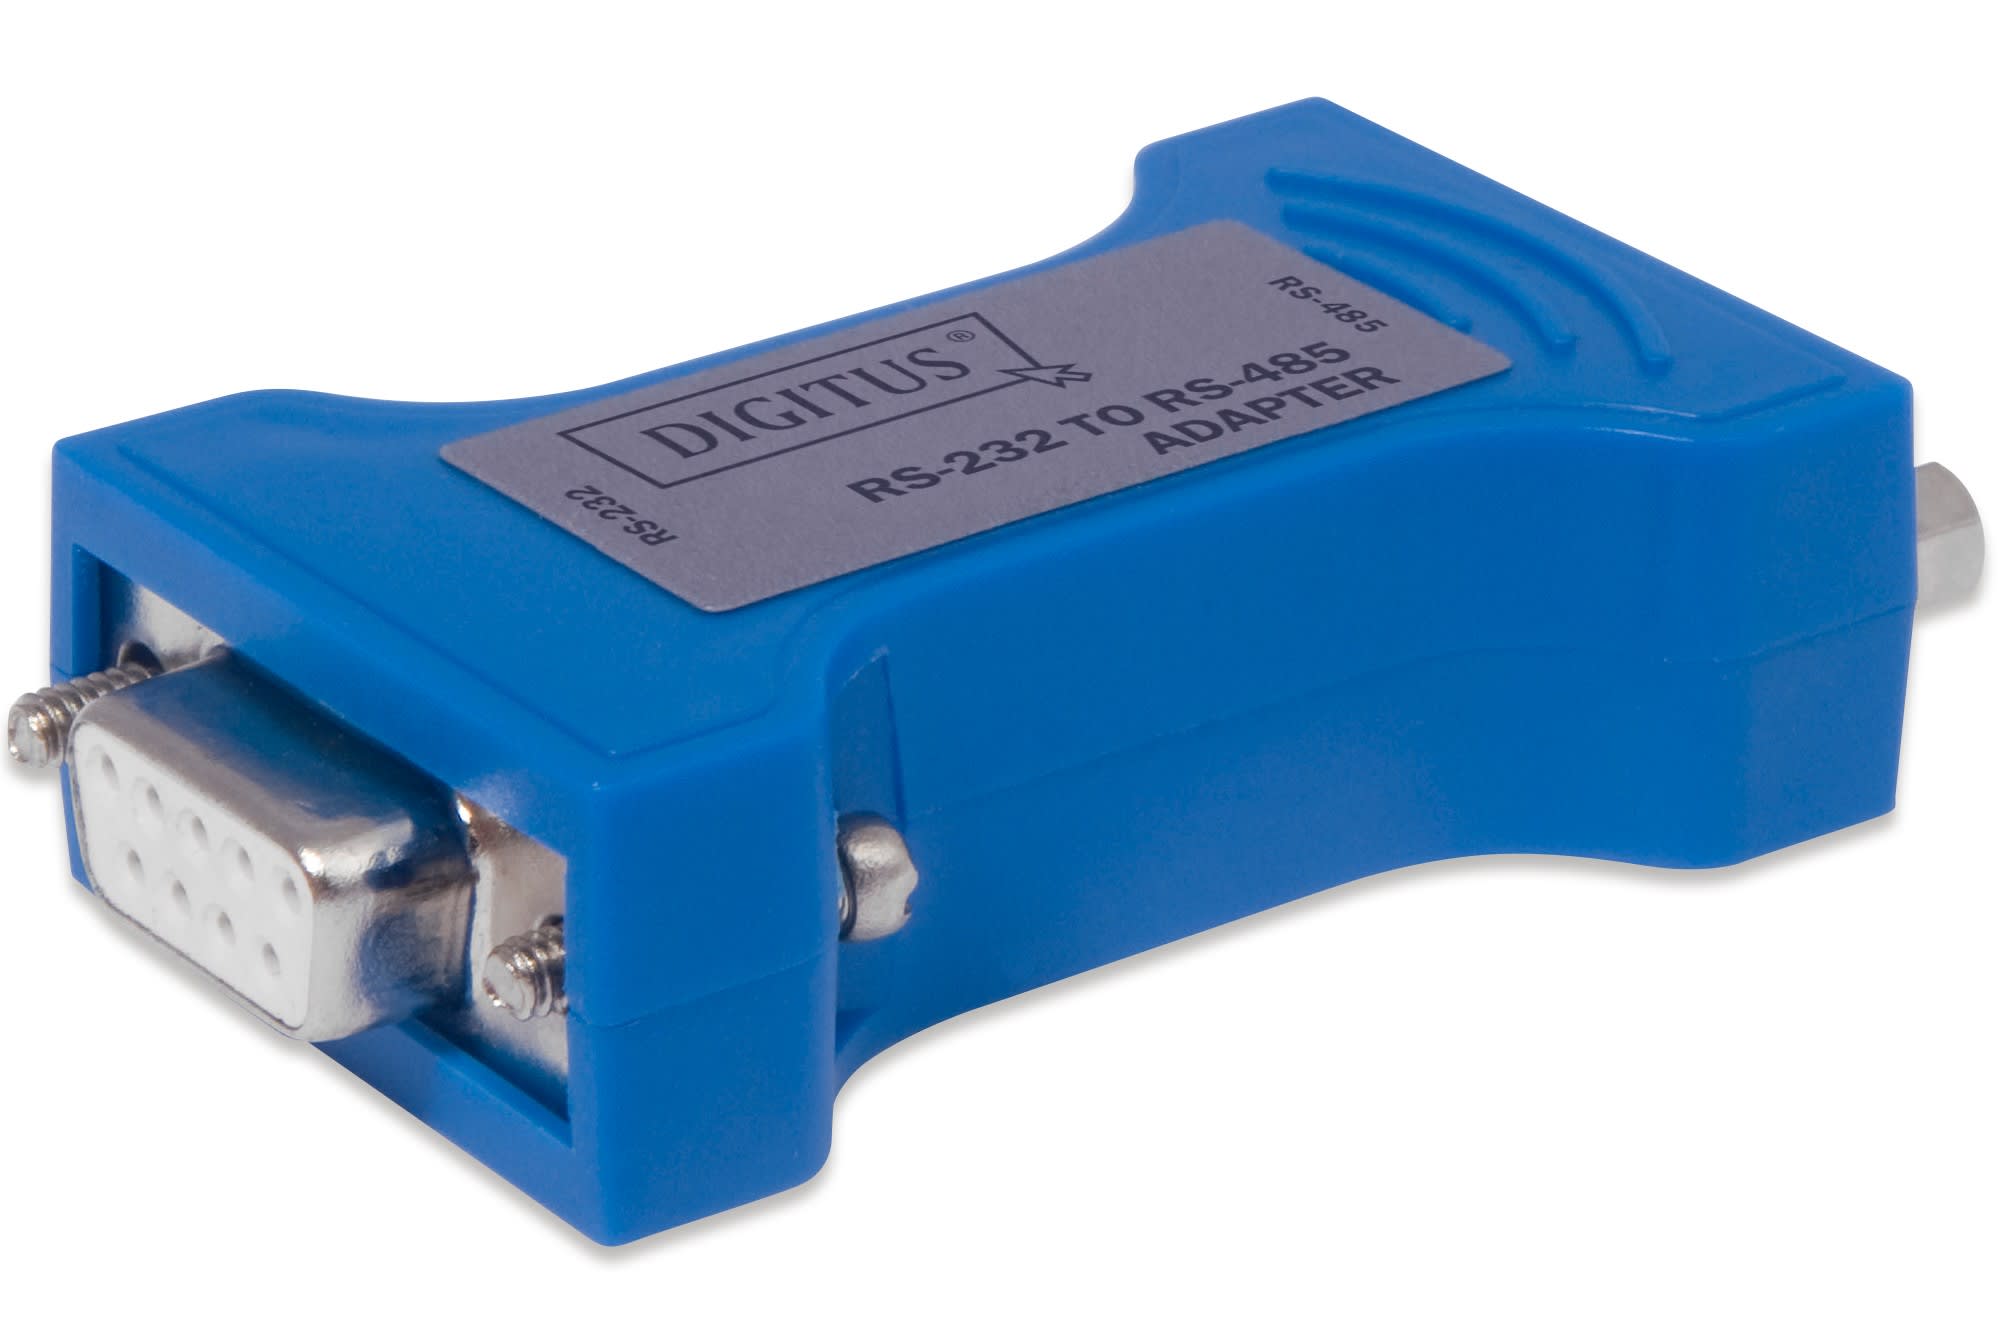 Assmann Electronic - RS232 to RS485 Adapter transmission rate: 300-115.2 Kbps